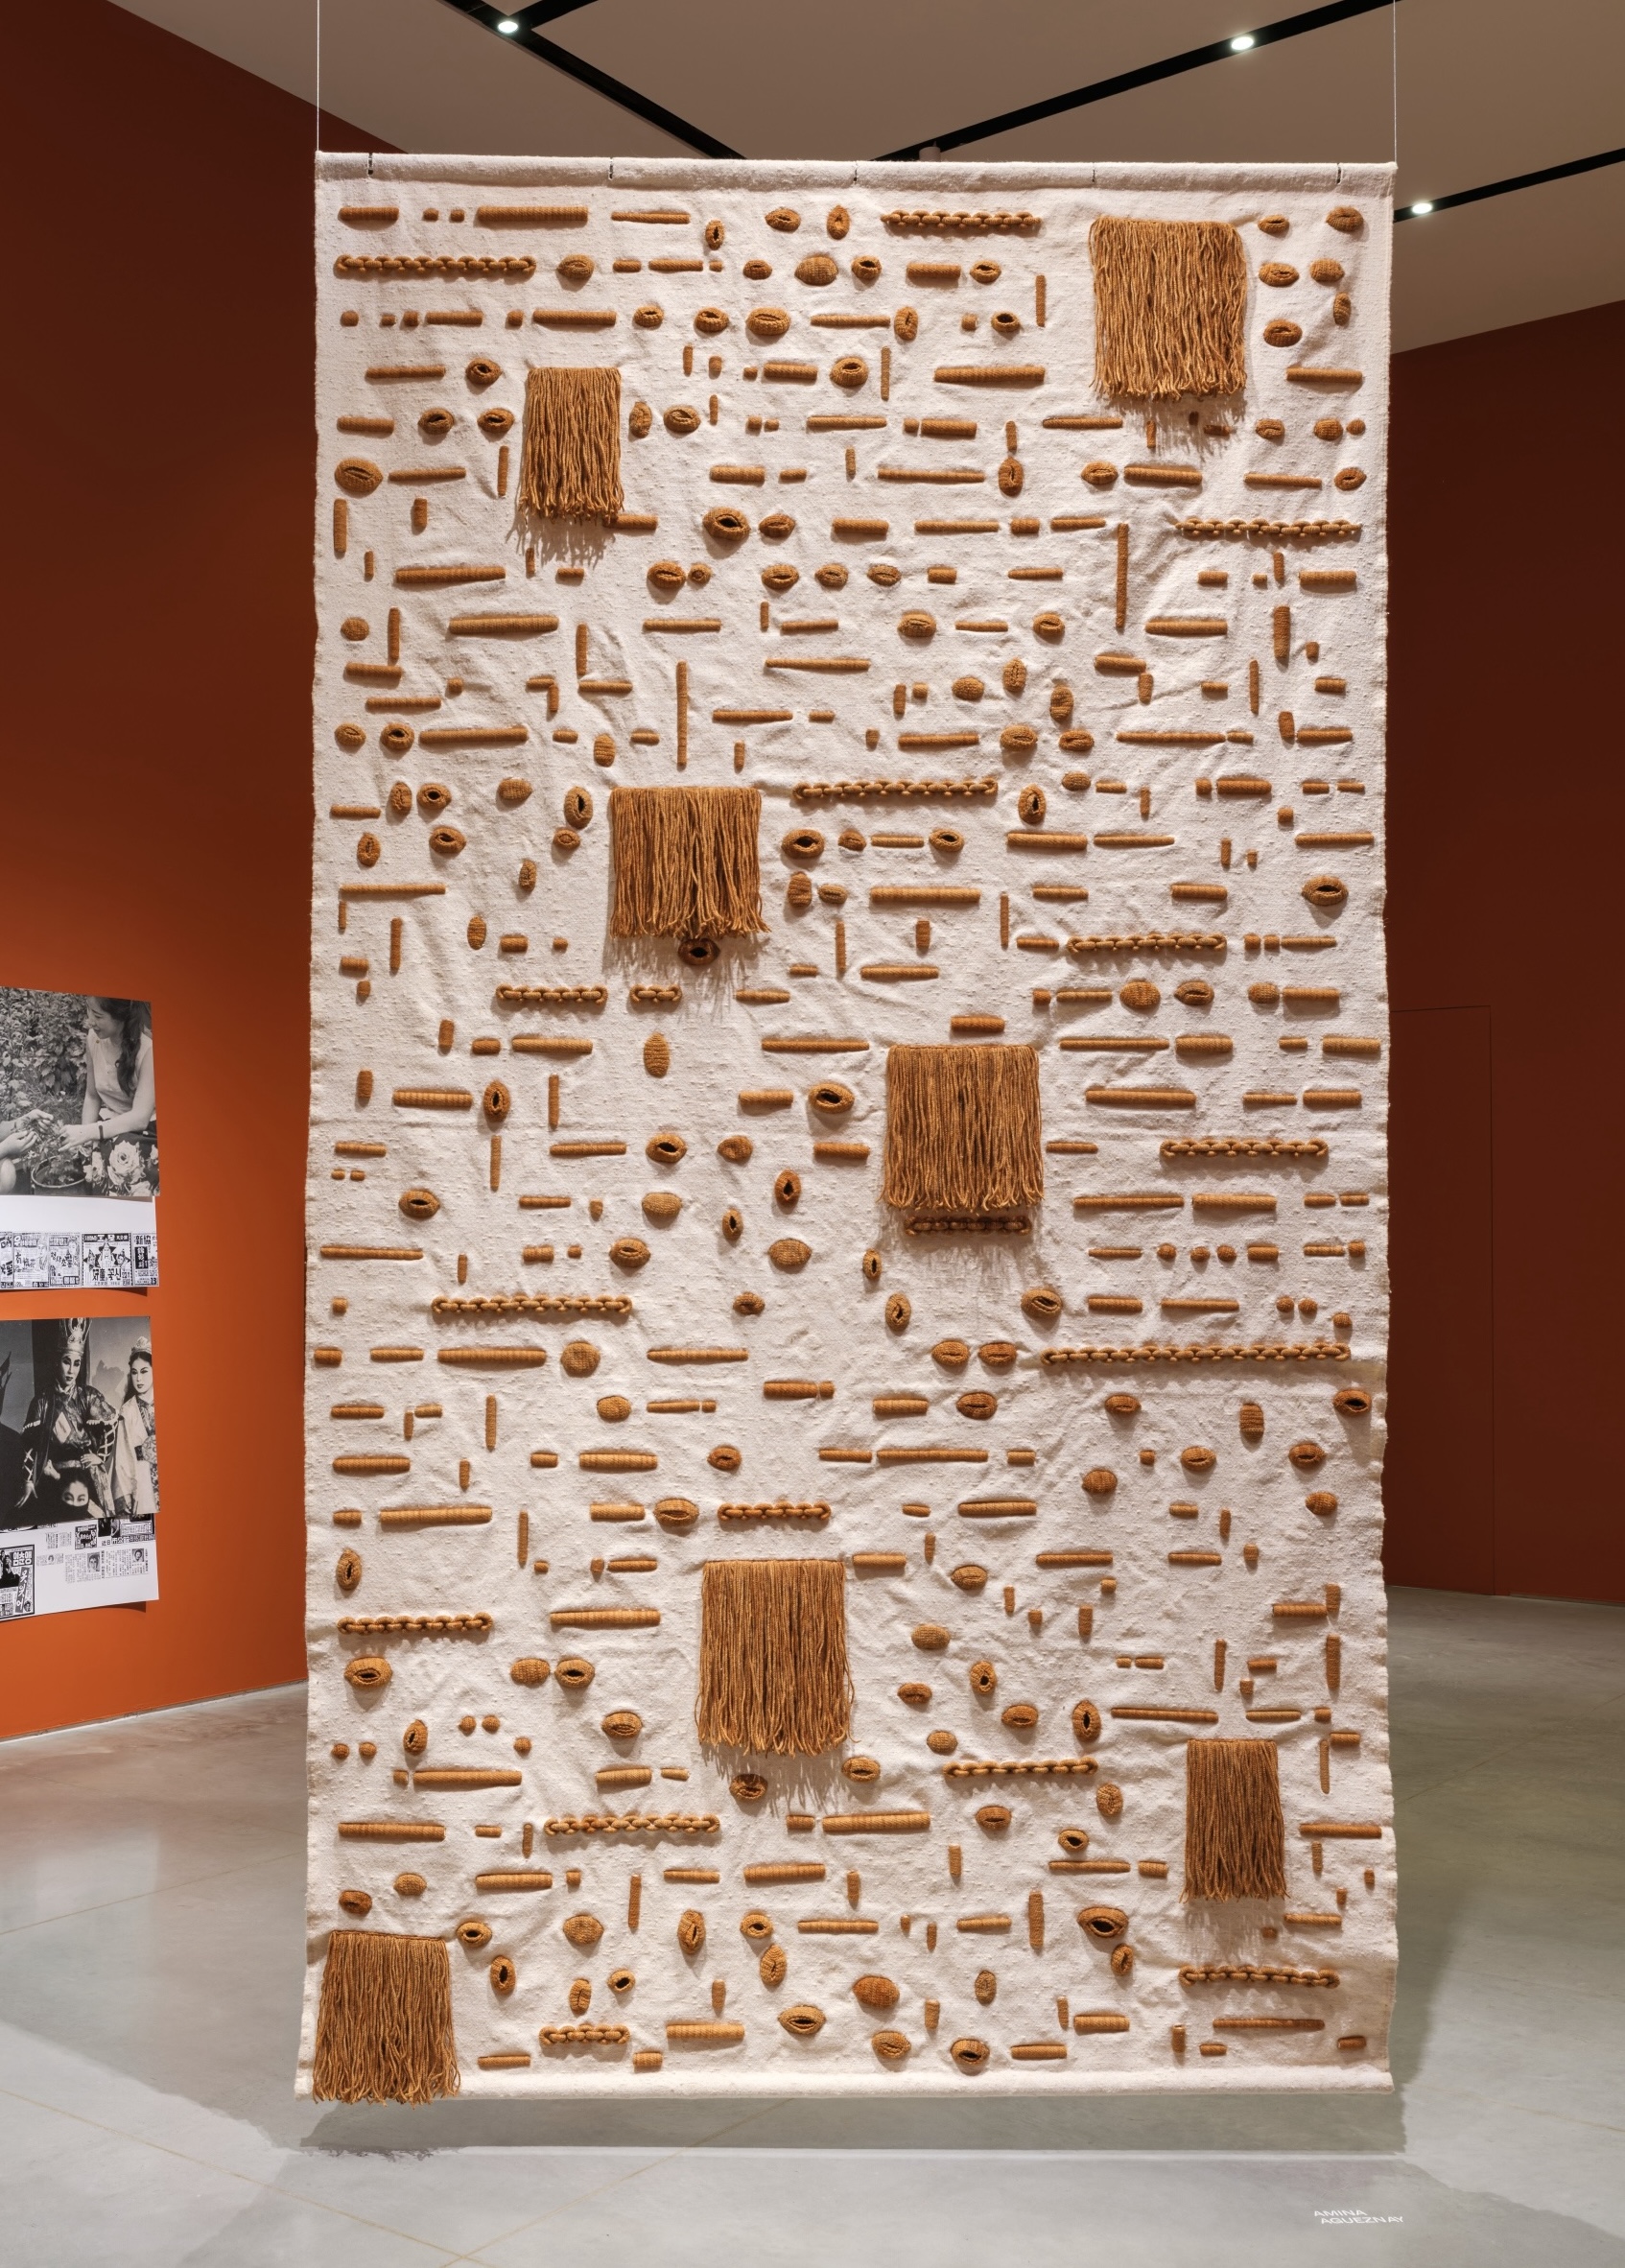 Photo of a sand-colored tapestry with brown geometric details suspended from the ceiling of a gallery.